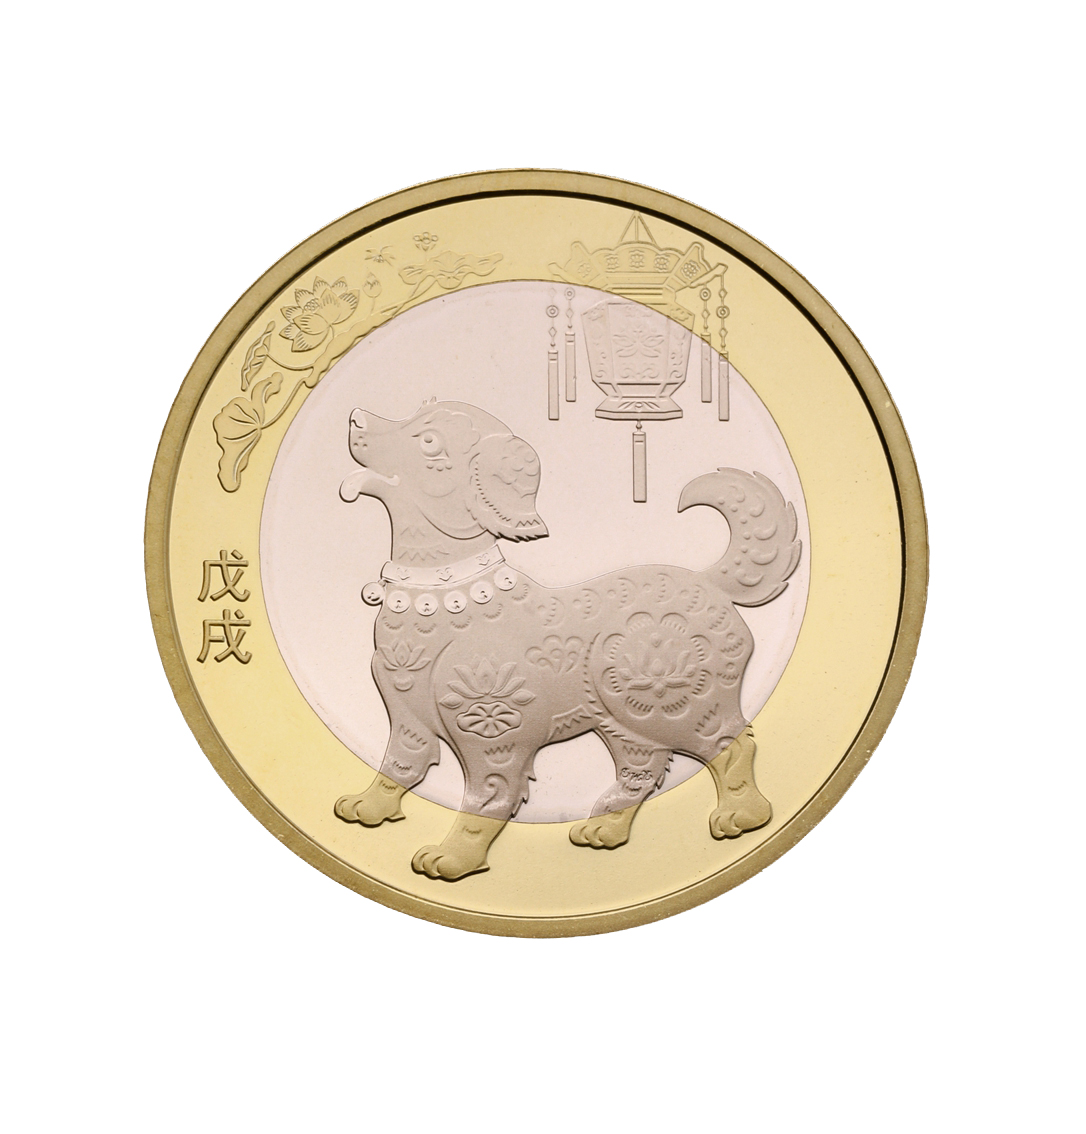 2018 Lunar New Year Year of the Dog commemorative coins